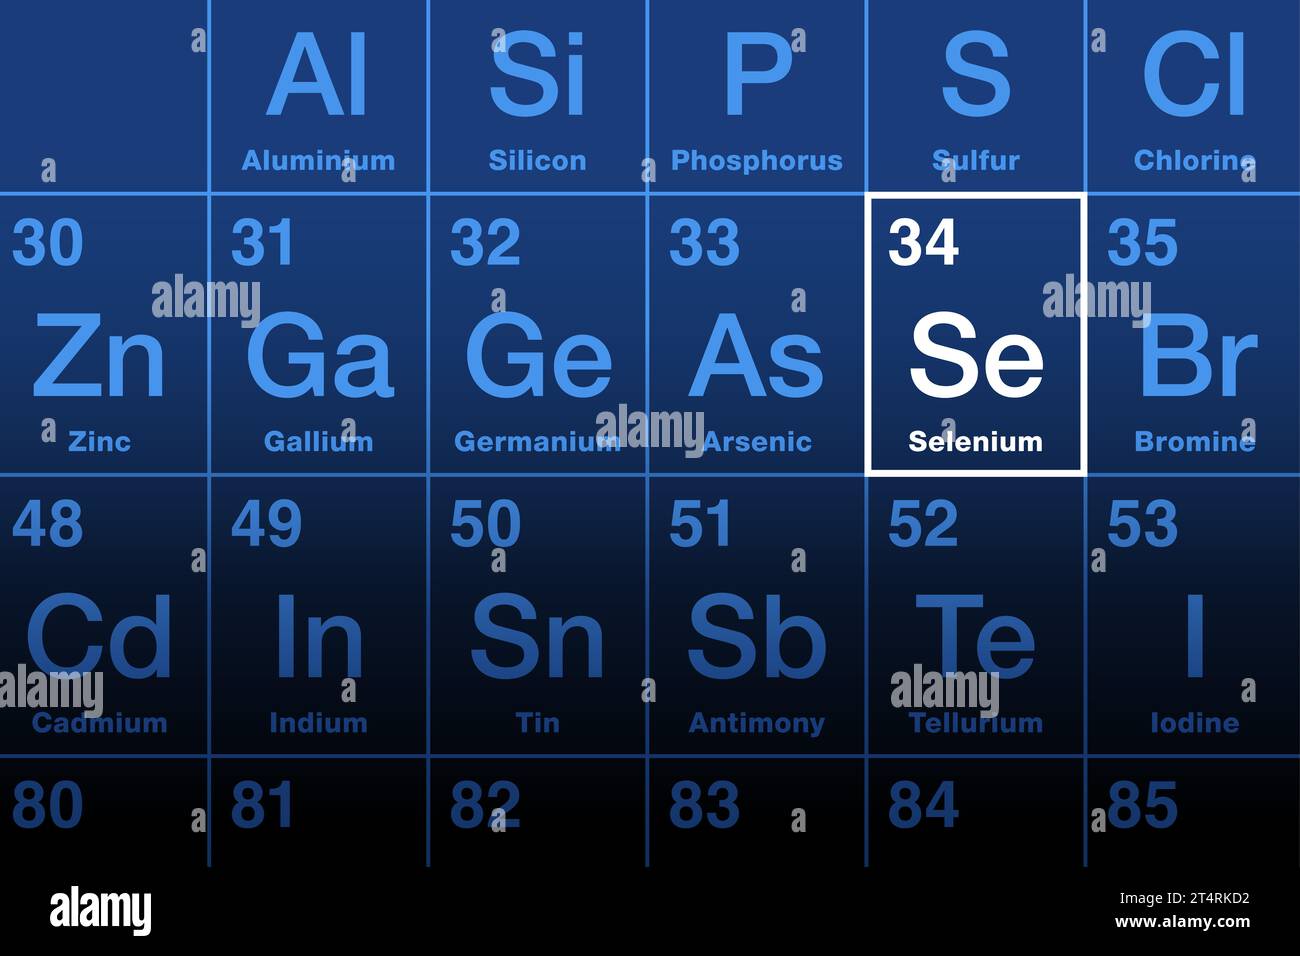 Selenium element on the periodic table with element symbol Se and with the atomic number 34. Trace amounts are necessary for cellular function. Stock Photo